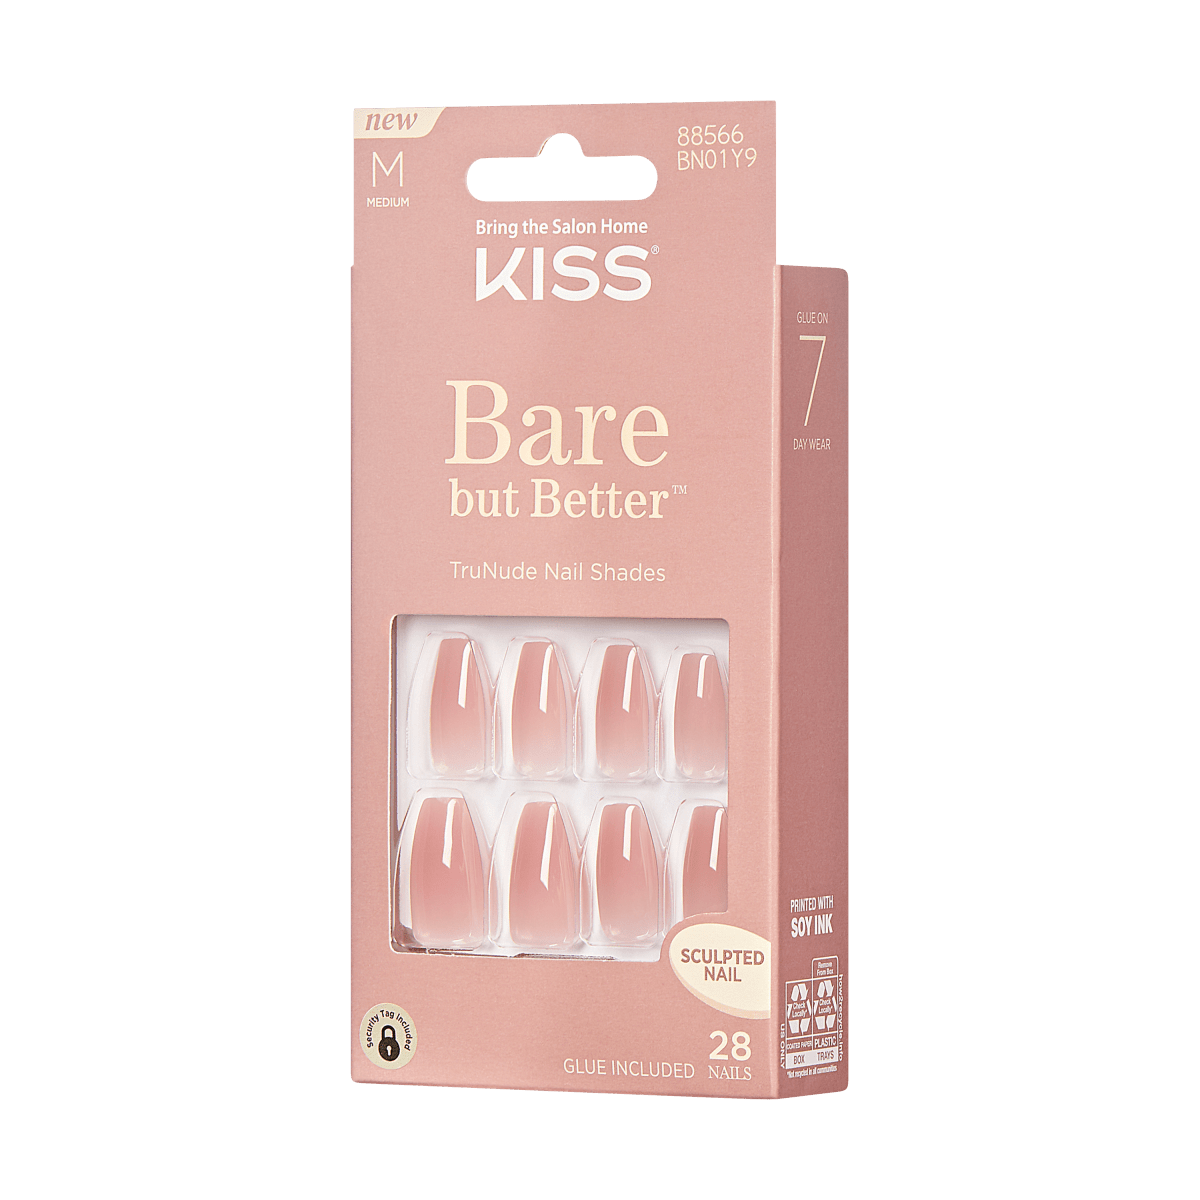 KISS Bare But Better, Press-On Nails, Bisque, Nude, Med Coffin, 28ct ...